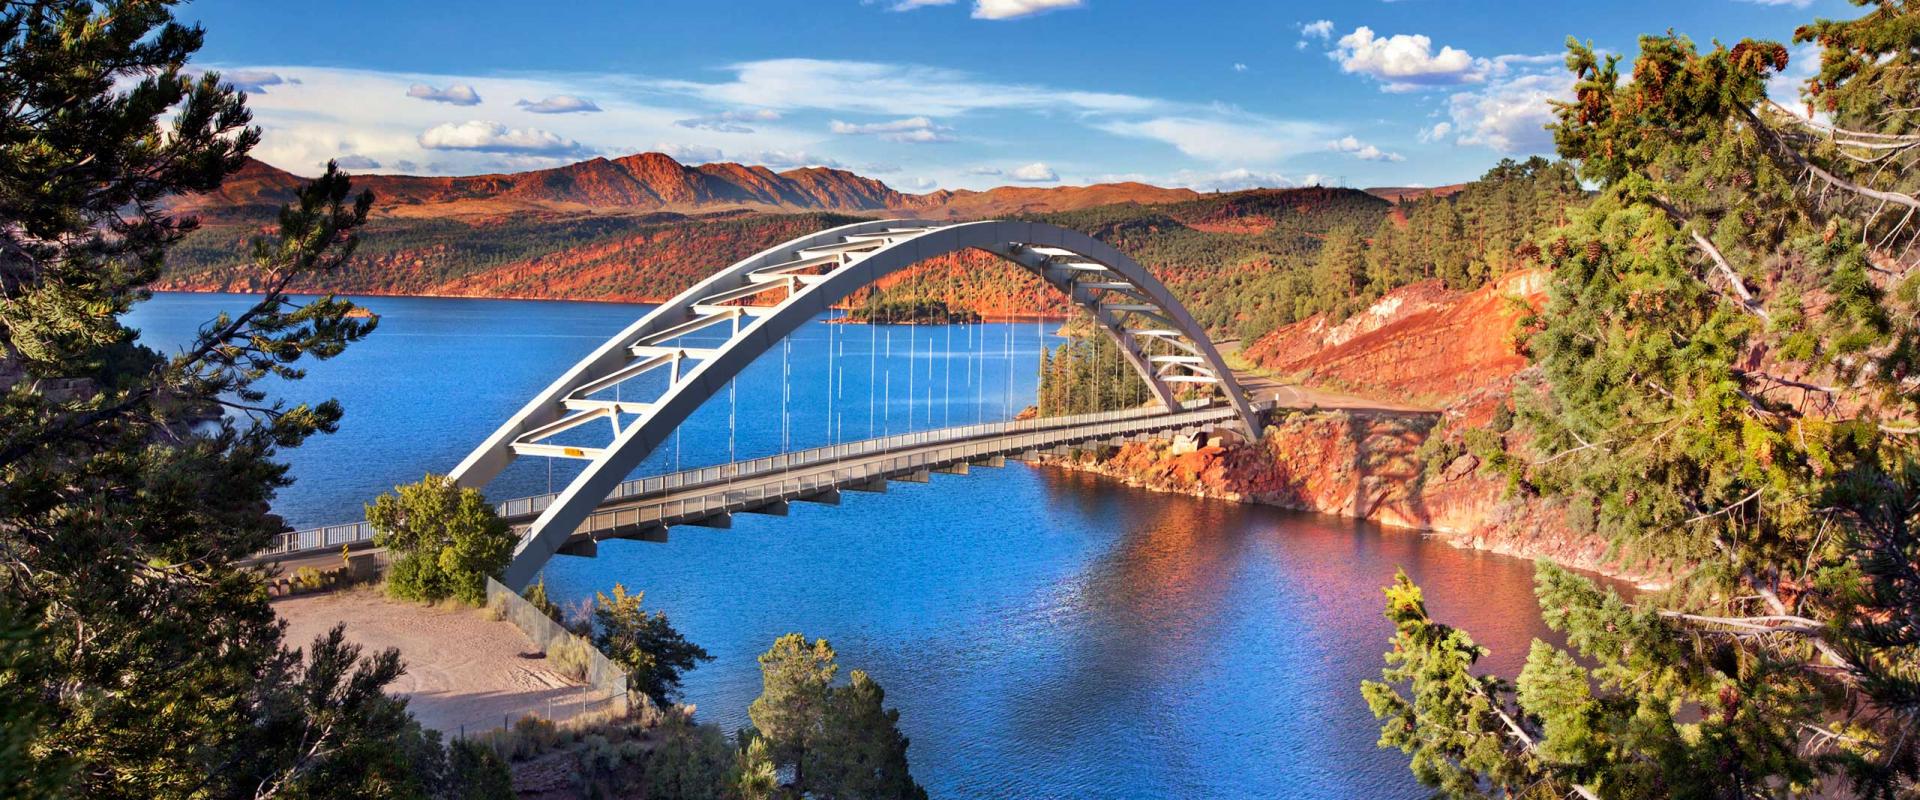 Cart Creek Bridge at Flaming Gorge National Recreation Area and the Flaming Gorge Reservoir within the Ashley National Forest.